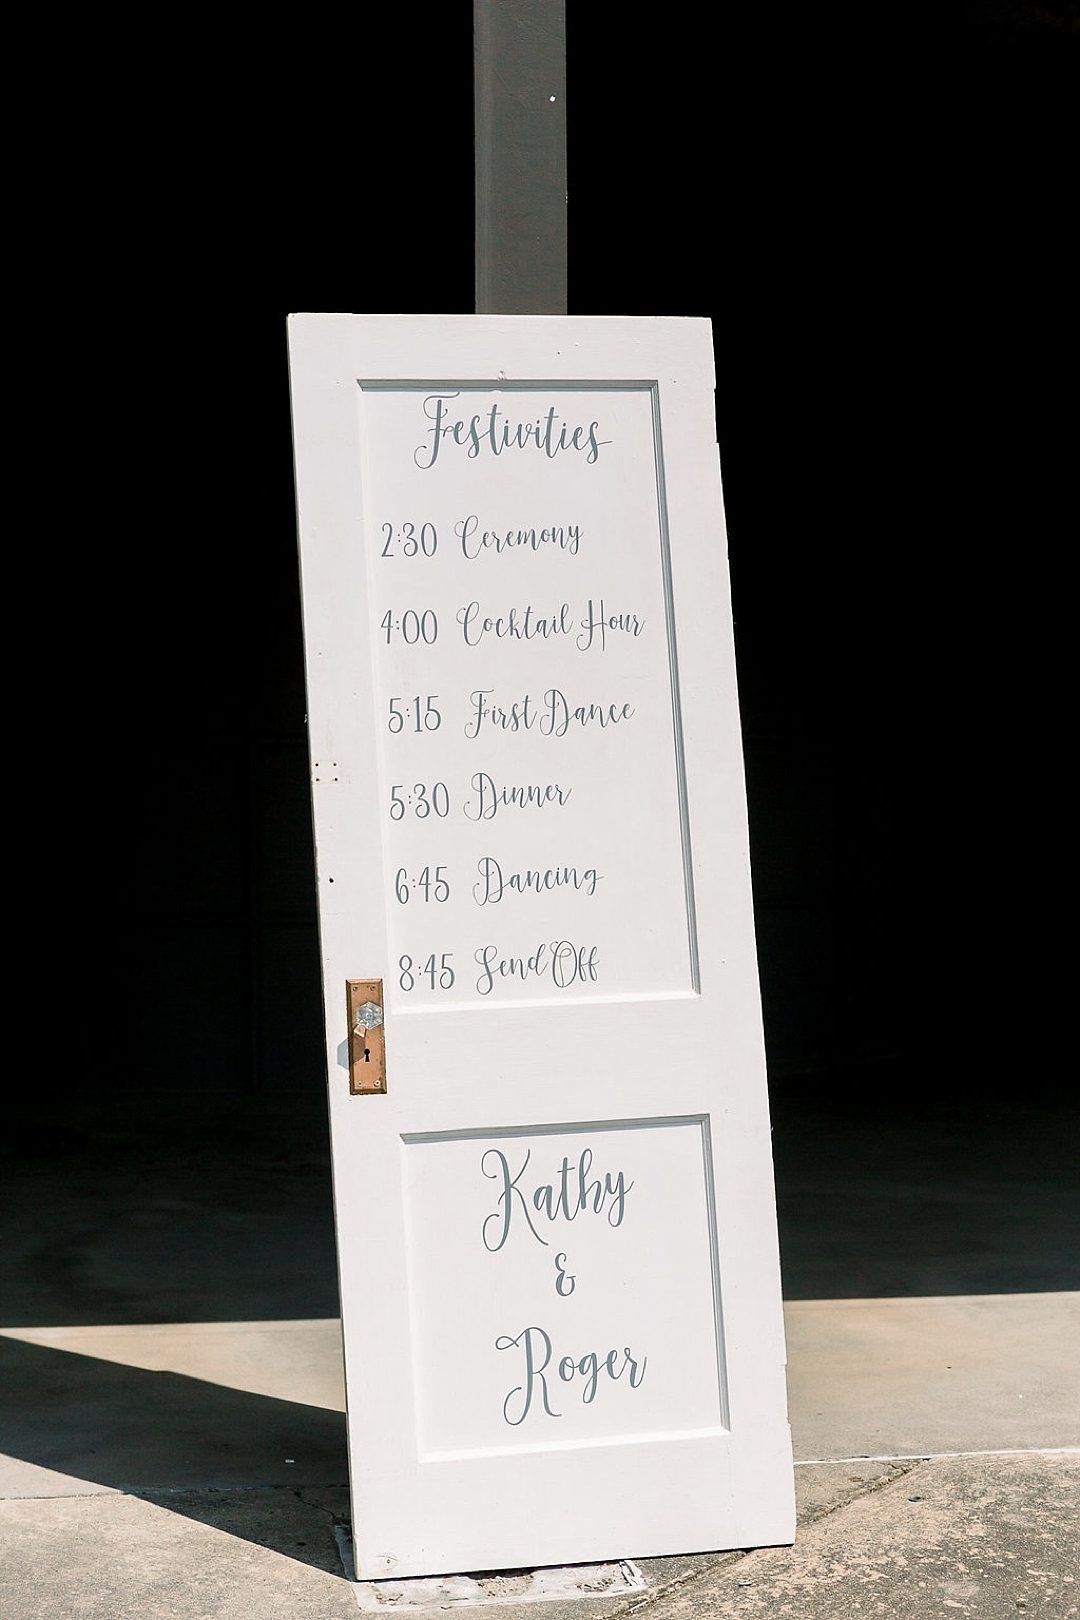 Reception details, Photos by Leigh Wolfe, Atlanta's top wedding photographer